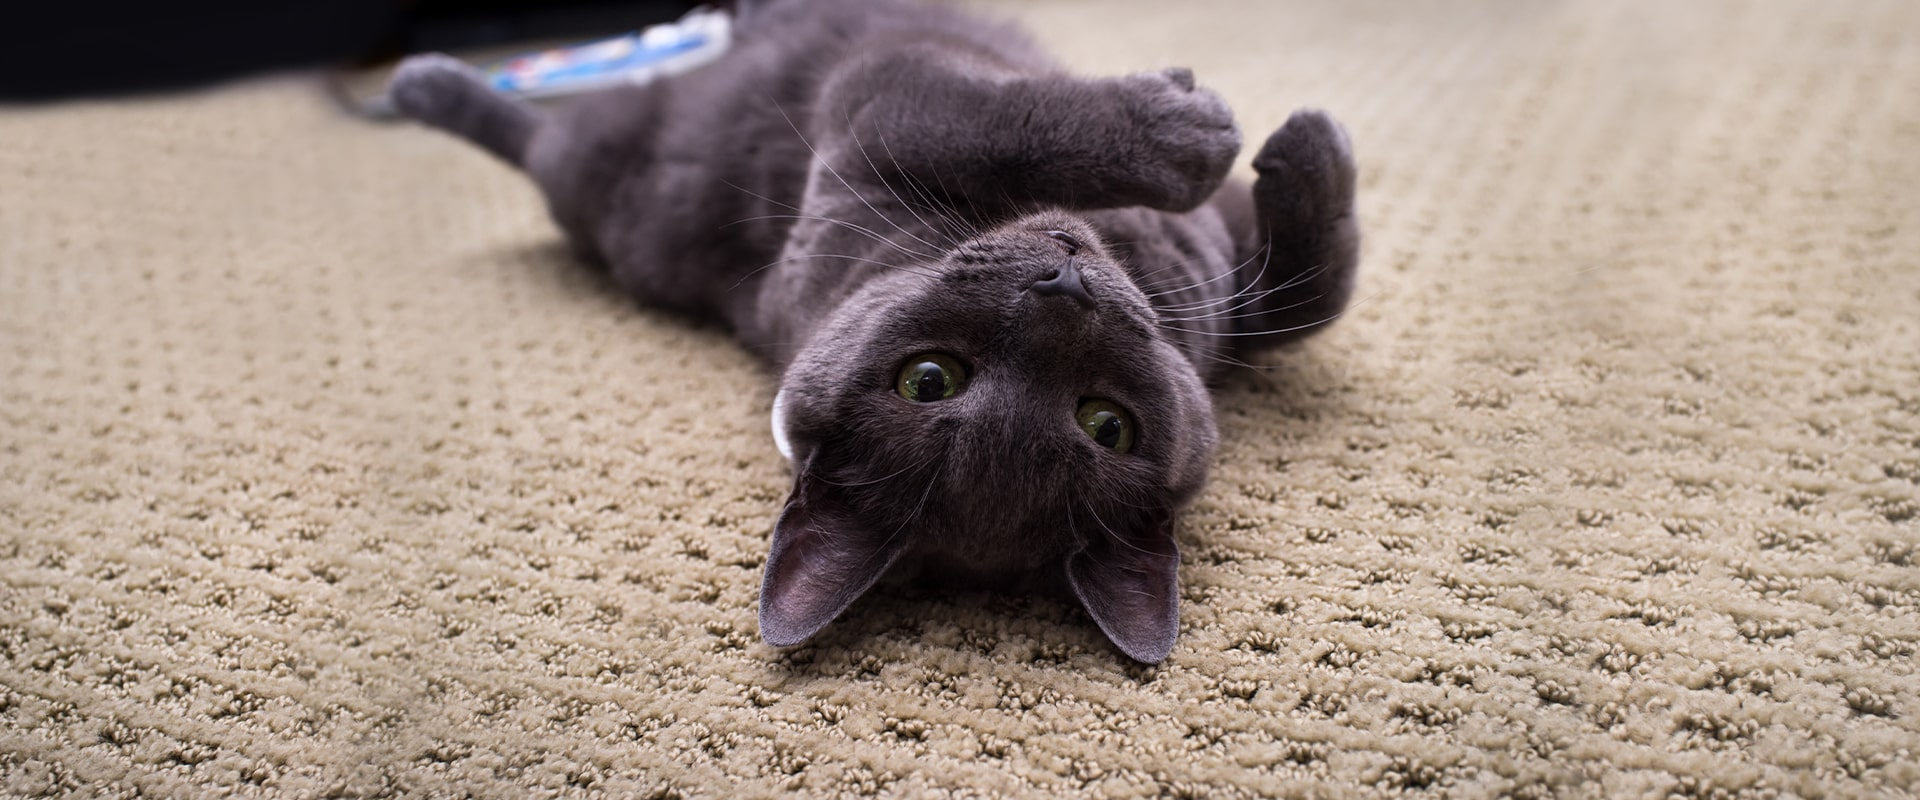 russian blue cat laying upside down on carpet